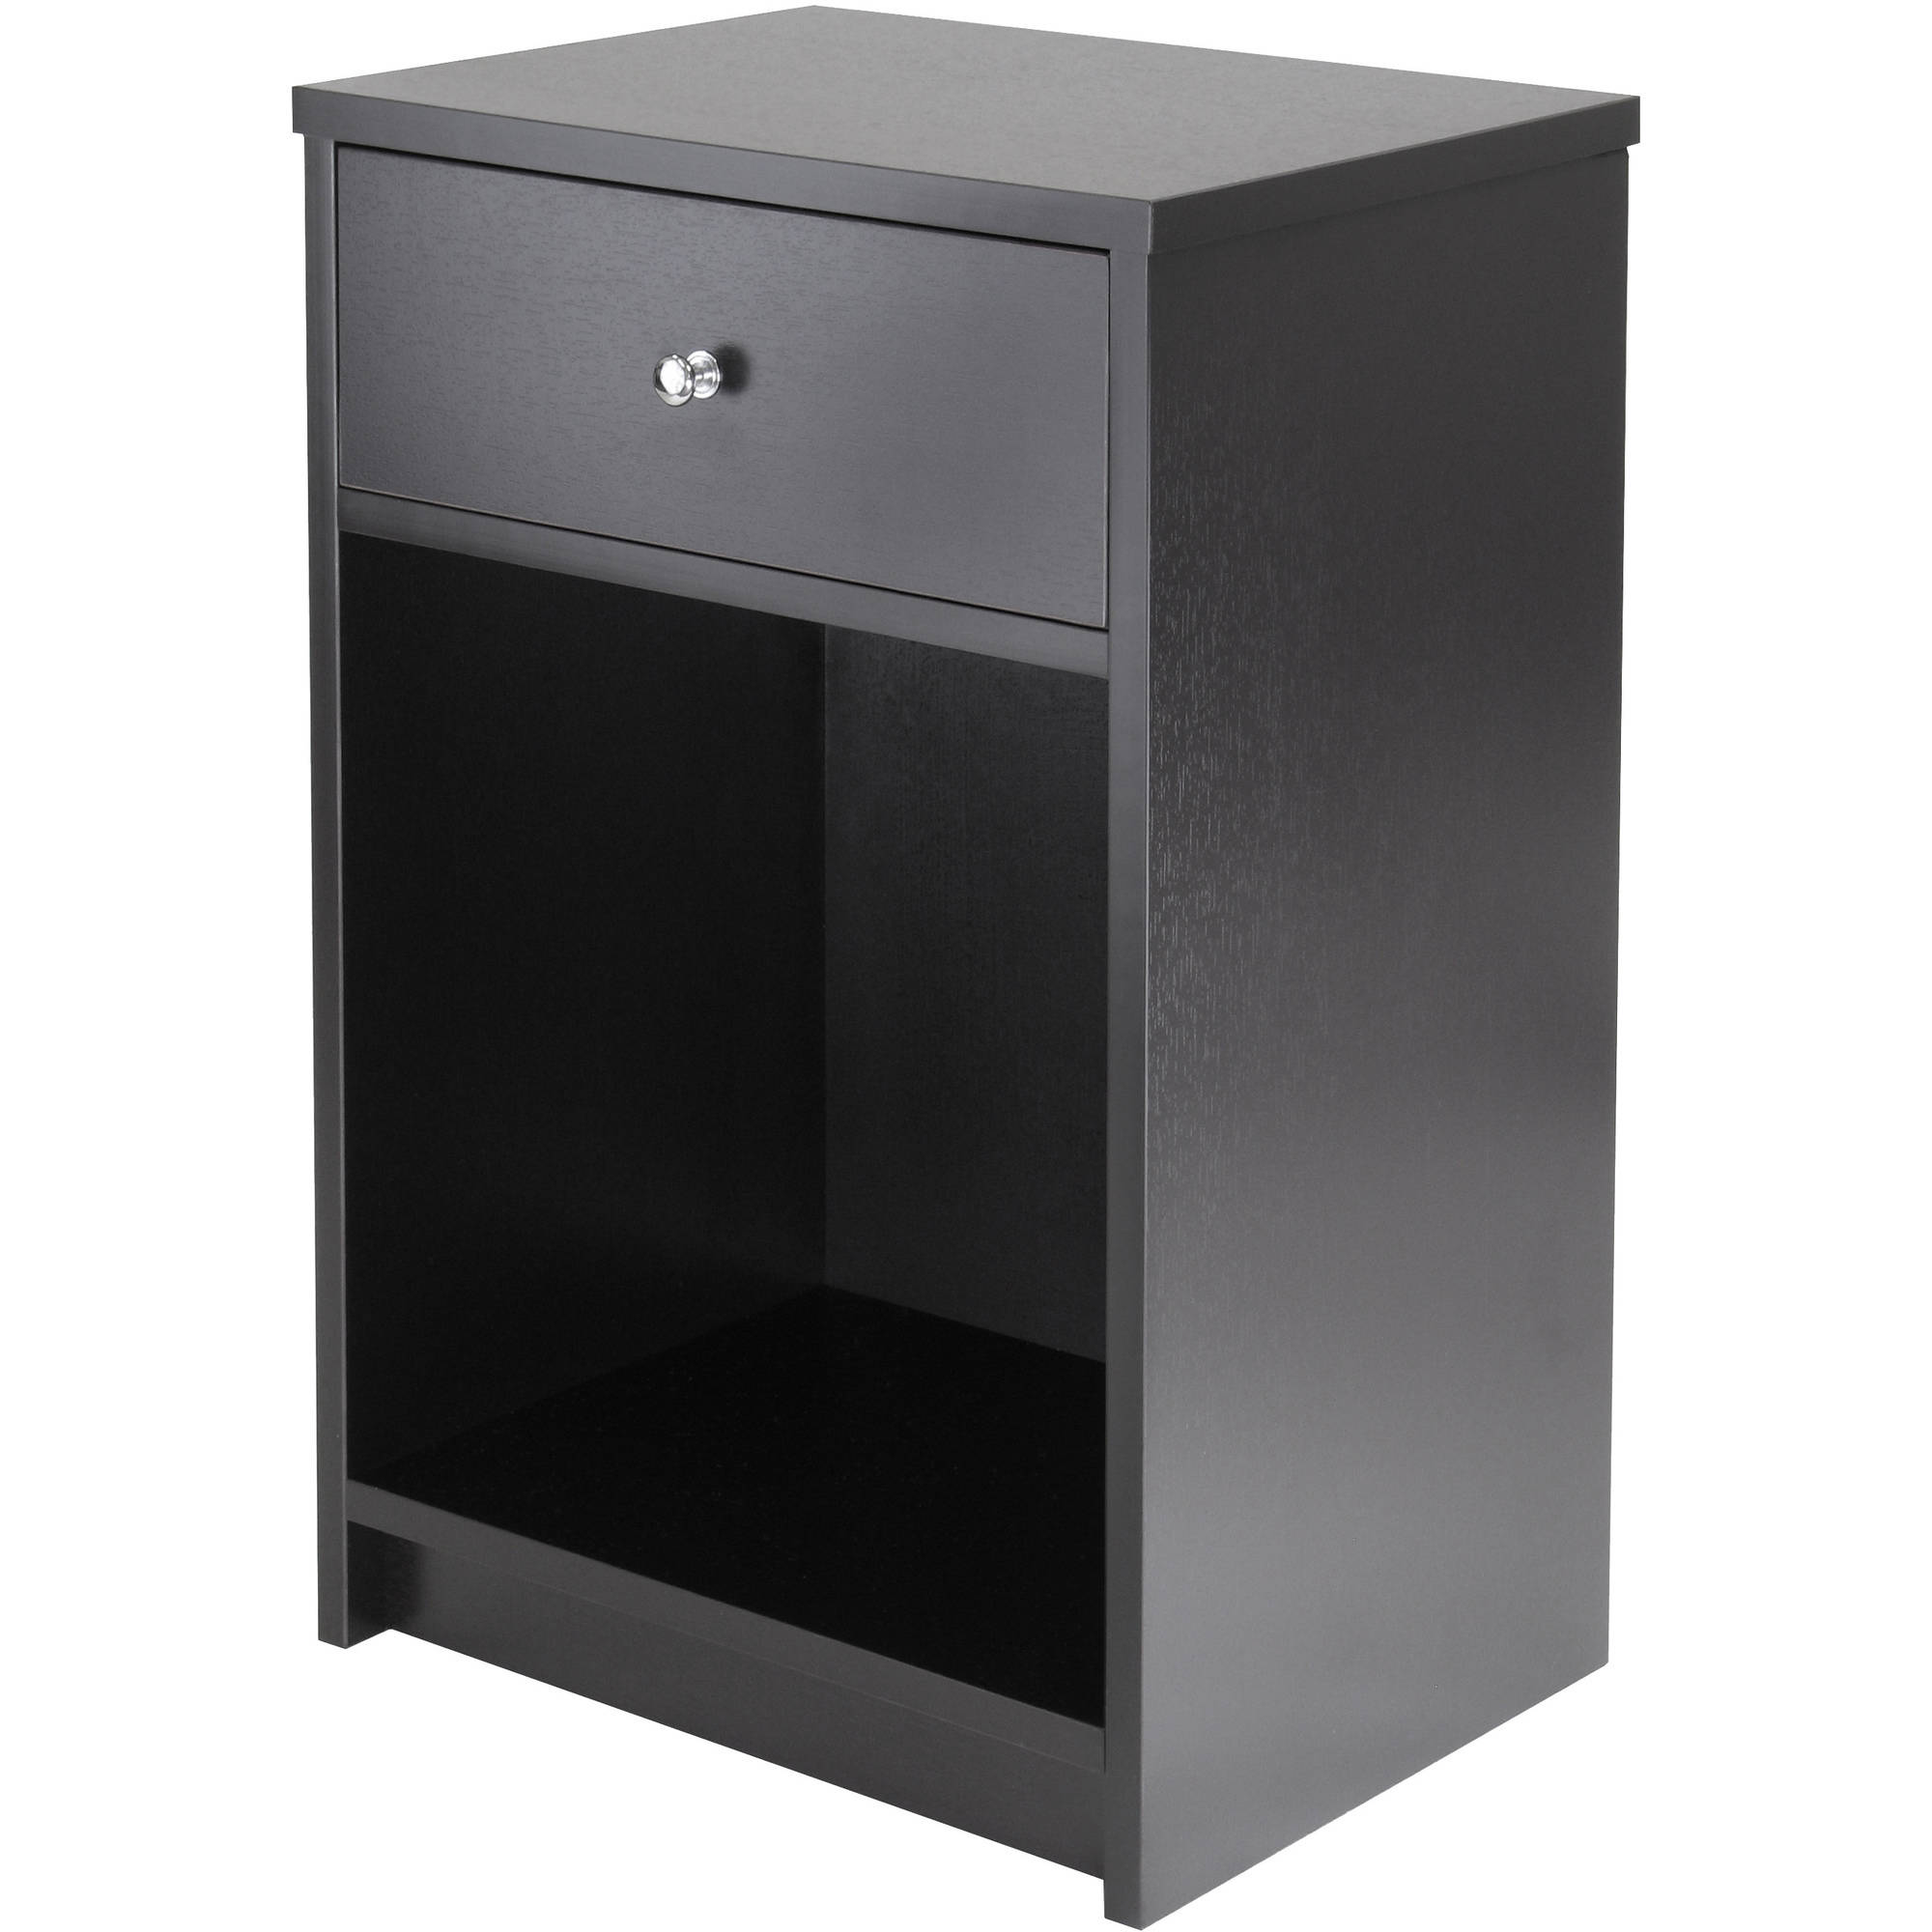 the super favorite mainstays nightstand end table espresso gallery multiple finishes just ladan black ashley leather sofa entry ideas small designs wood metal furniture legs